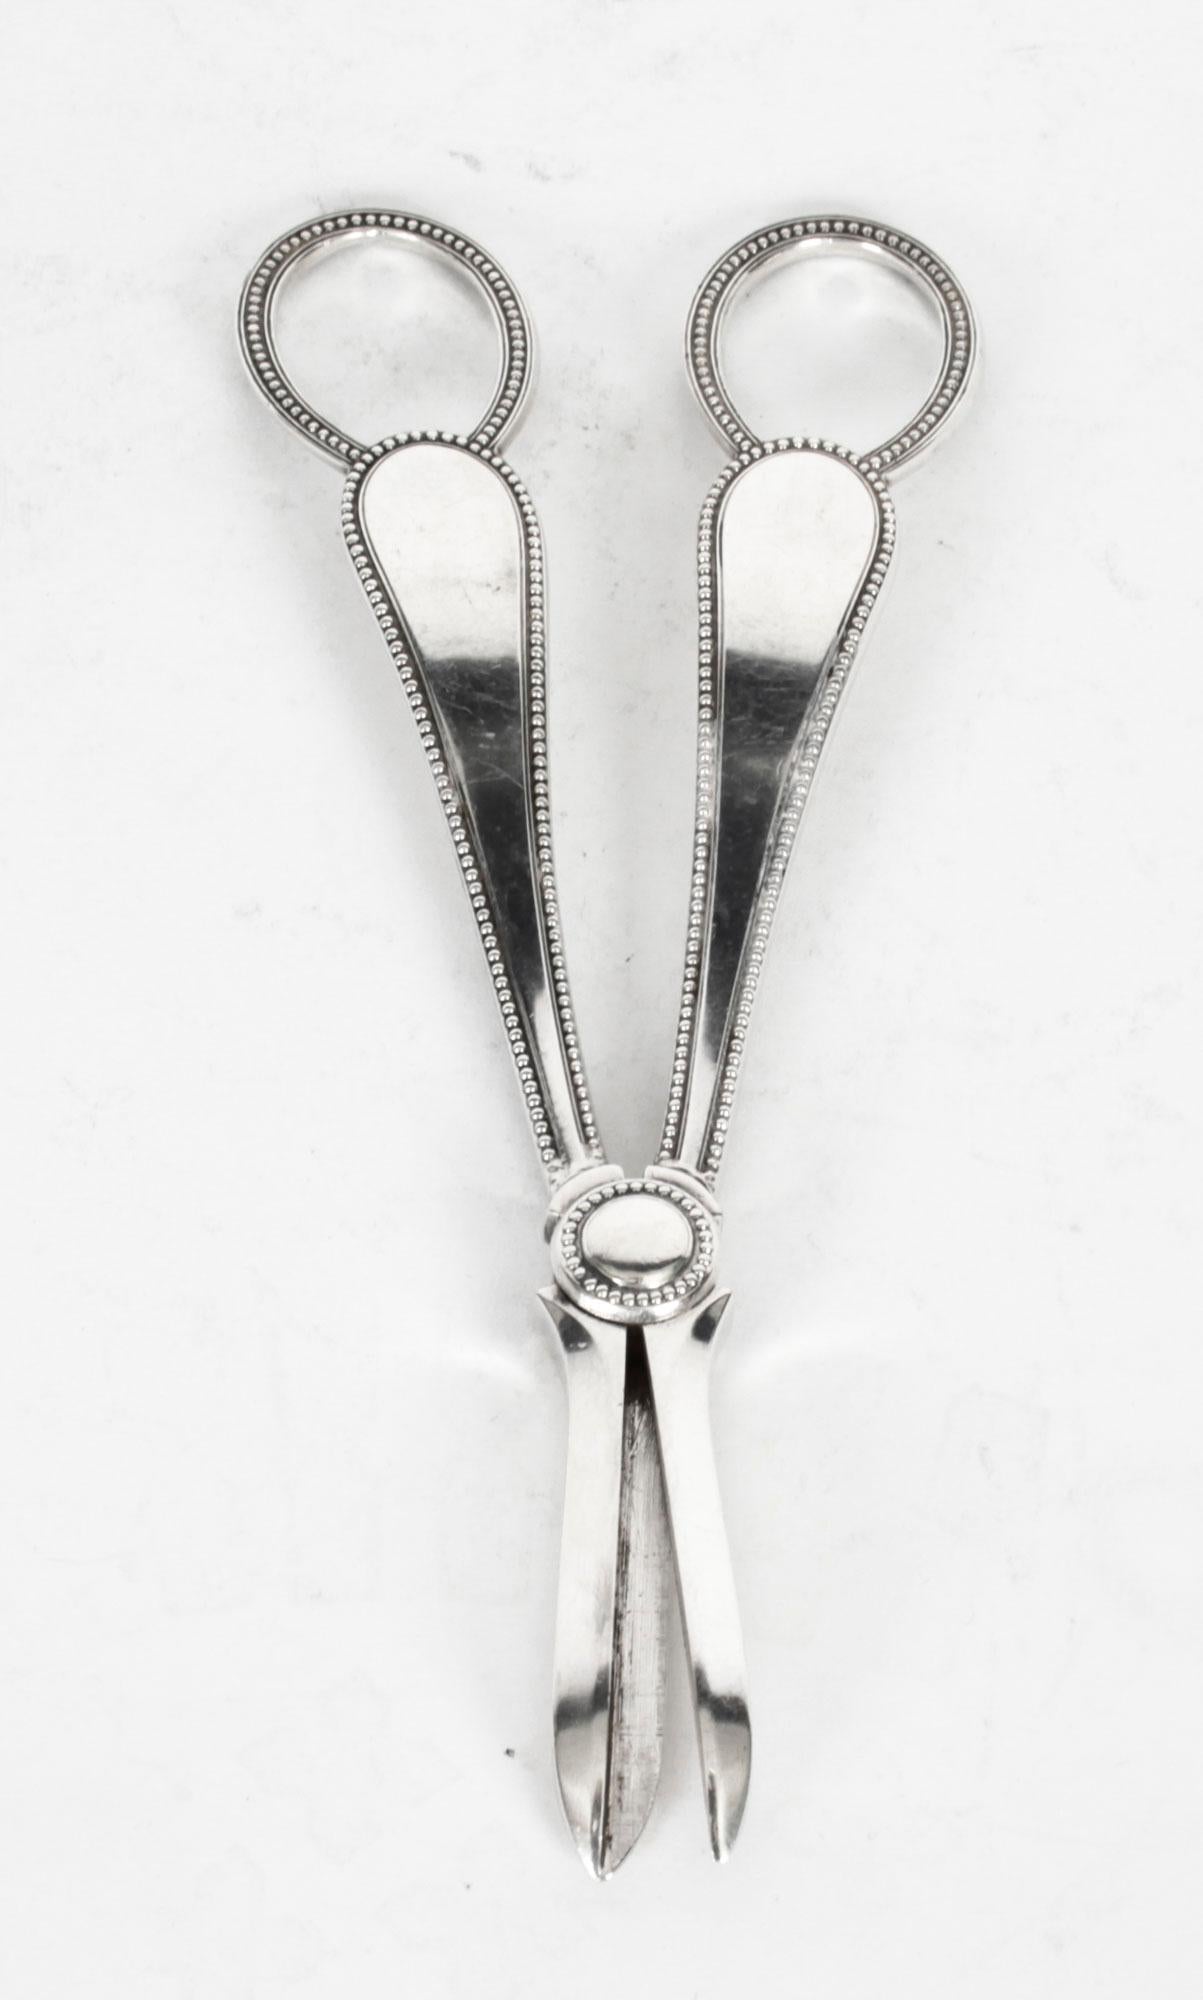 English Antique Pair Silver Plate Grape Scissors by Martin Hall & Co Early 20th Century